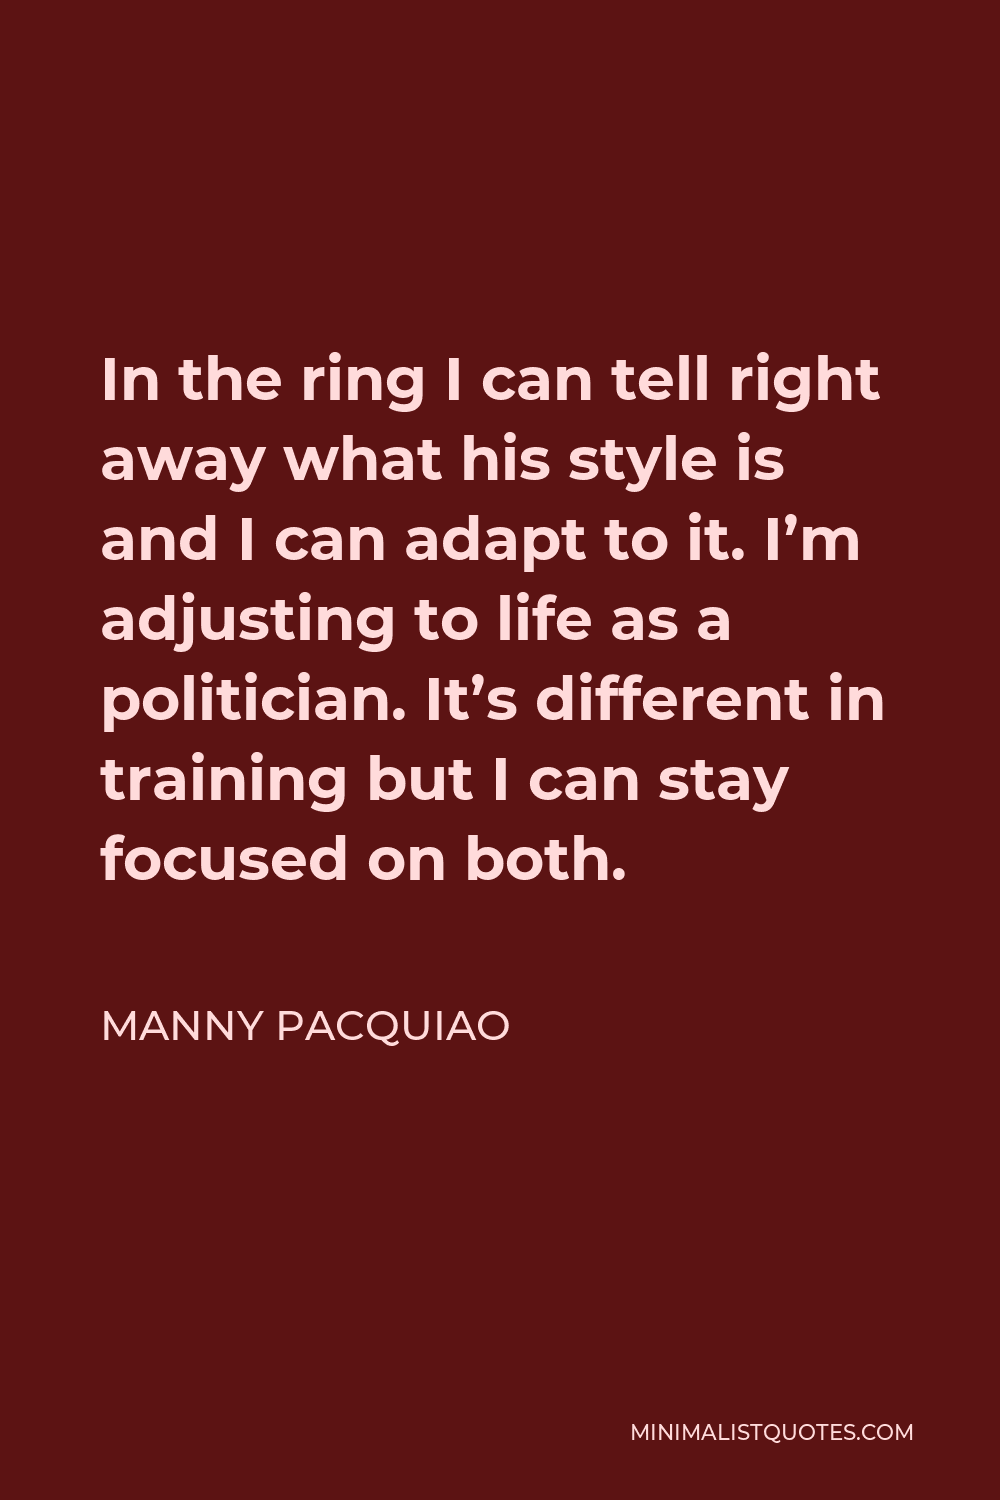 Manny Pacquiao Quote - In the ring I can tell right away what his style is and I can adapt to it. I’m adjusting to life as a politician. It’s different in training but I can stay focused on both.